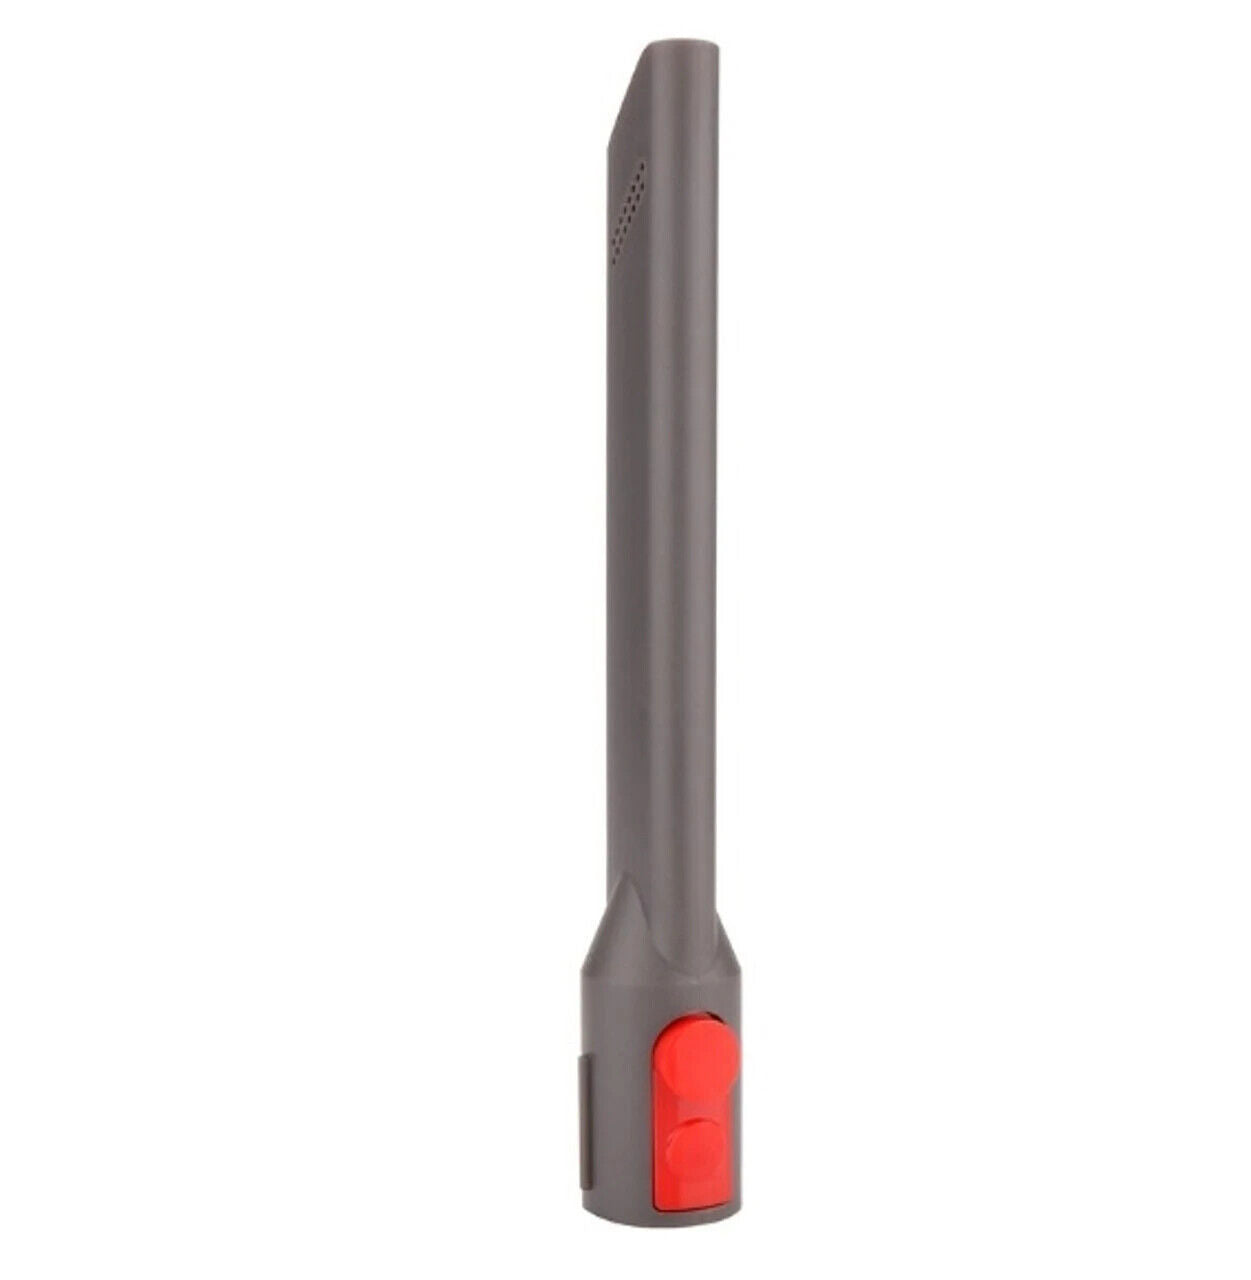 Flexible Crevice Tool - Perfect For Cleaning Corners And On V7, V8, V10,  V11, And V15 Cordless Vacuum Cleaners - Temu